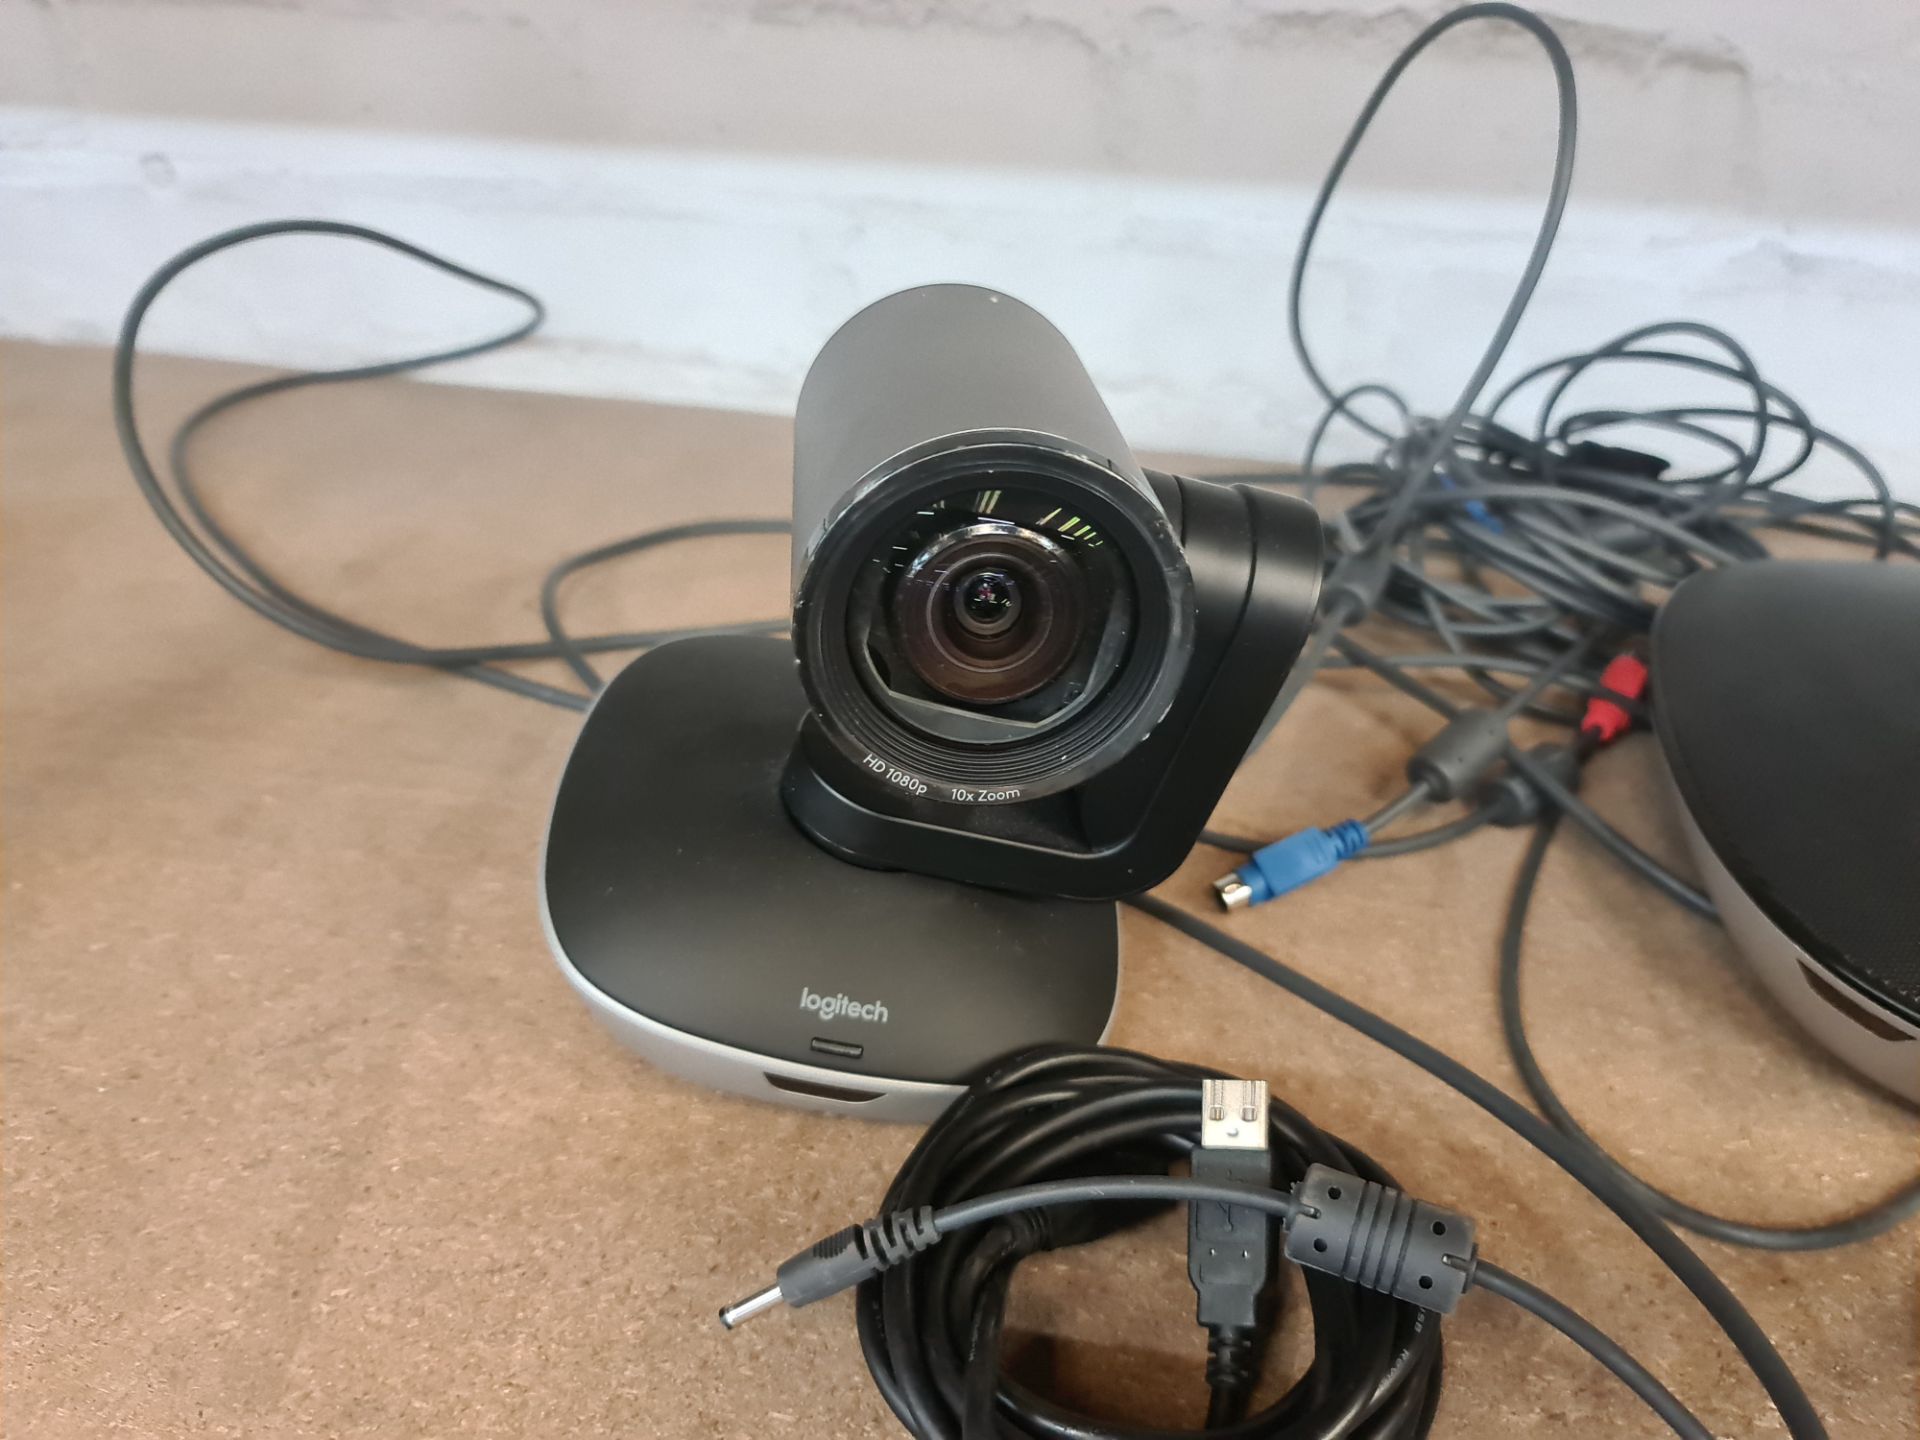 Logitech video conferencing system comprising base station, camera, remote control, powerpack & what - Image 6 of 6